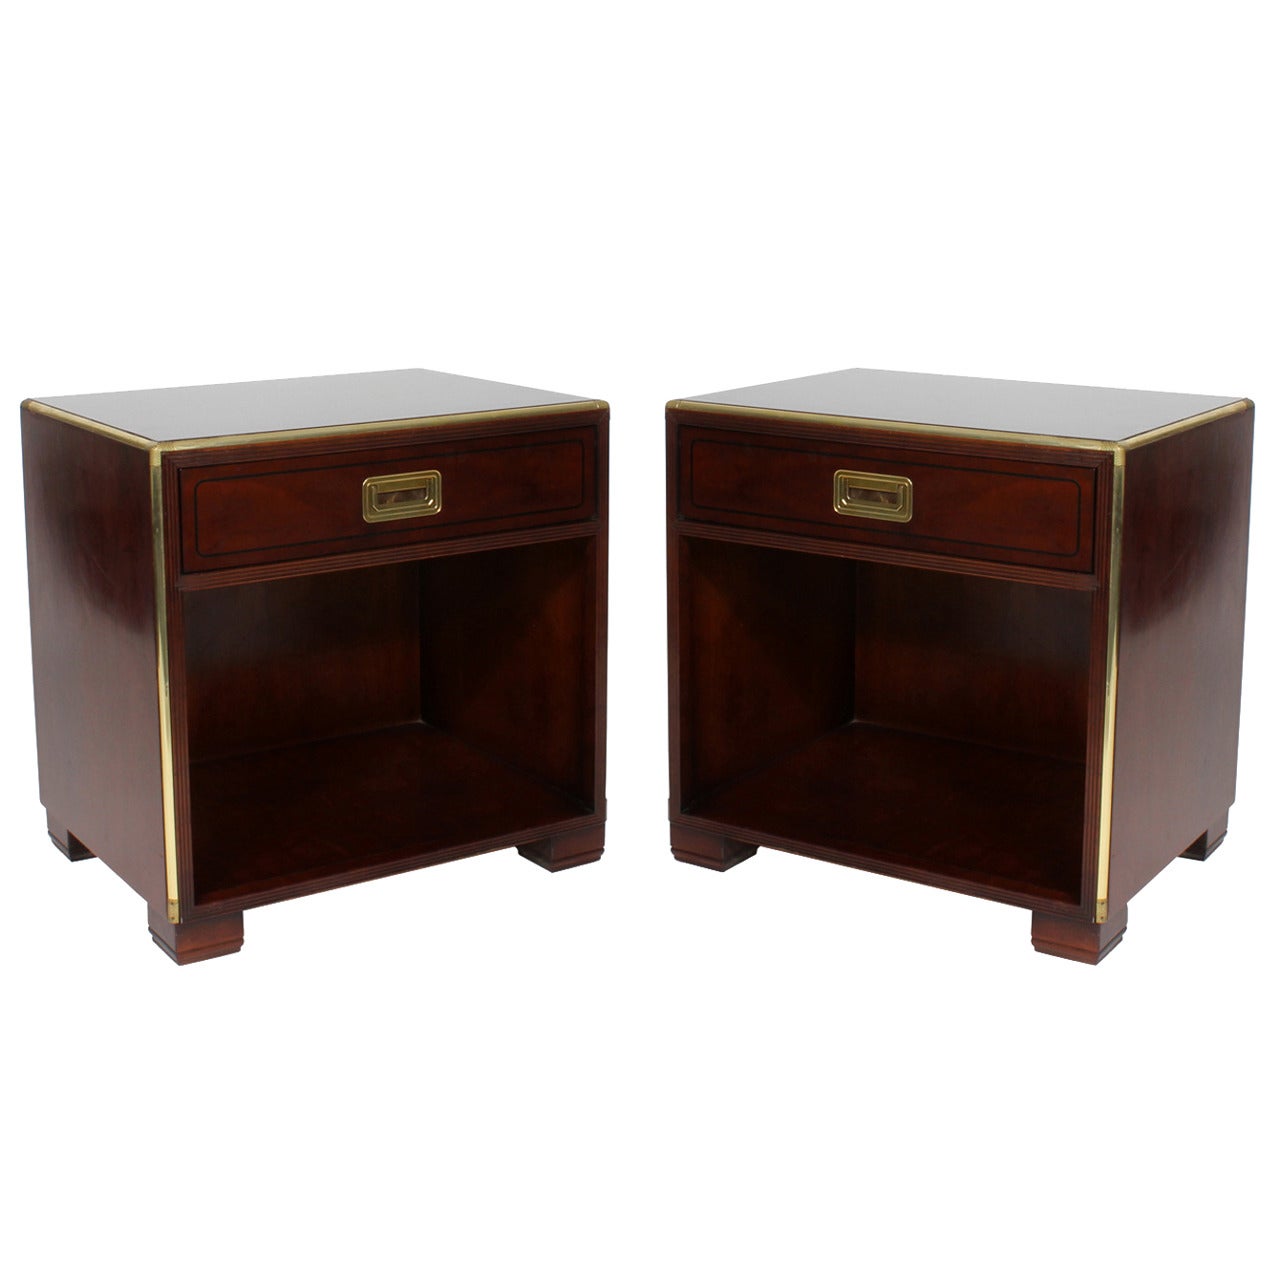 Pair of Brass Trimmed Mahogany Campaign Style Nightstands or Tables by Baker